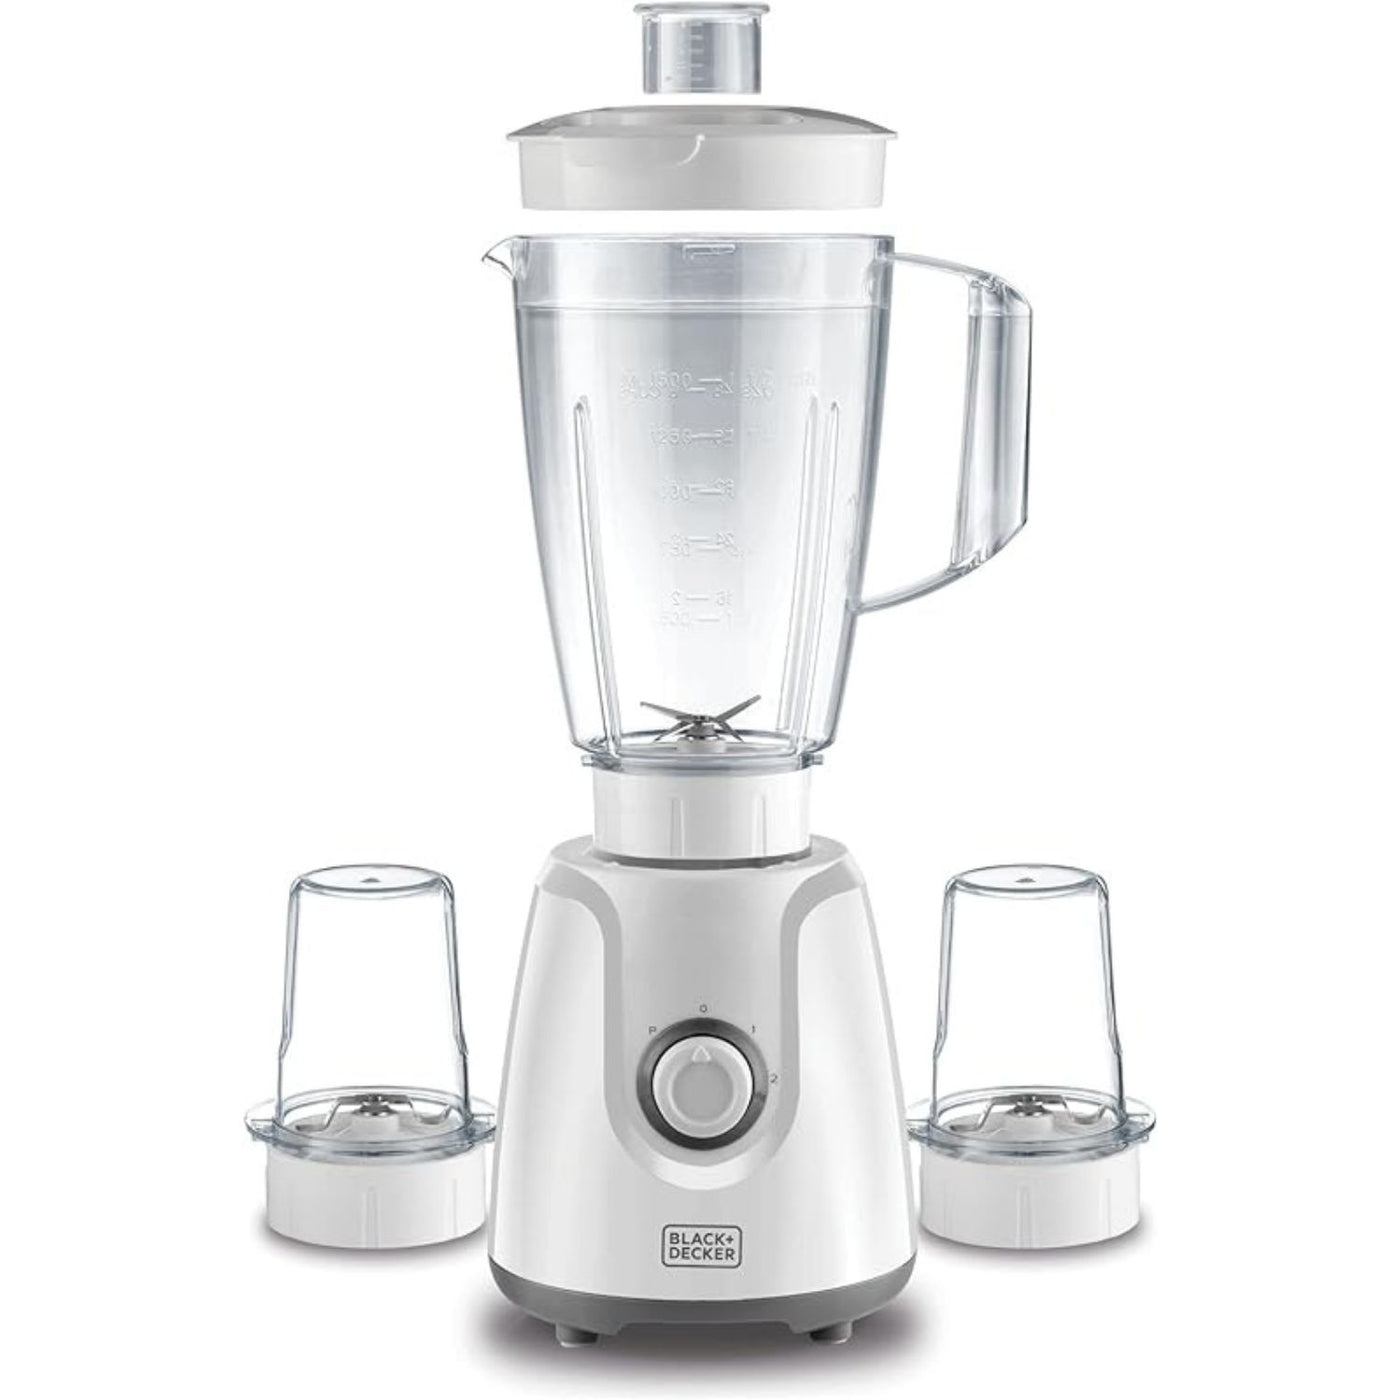 400W 1.5L Blender With Grinder Mills With 300ml 2 Grinding Mill, Stainless Steel Blades and Two Pulse Control White, For Fine Grinding Coffee Herbs&Spices White